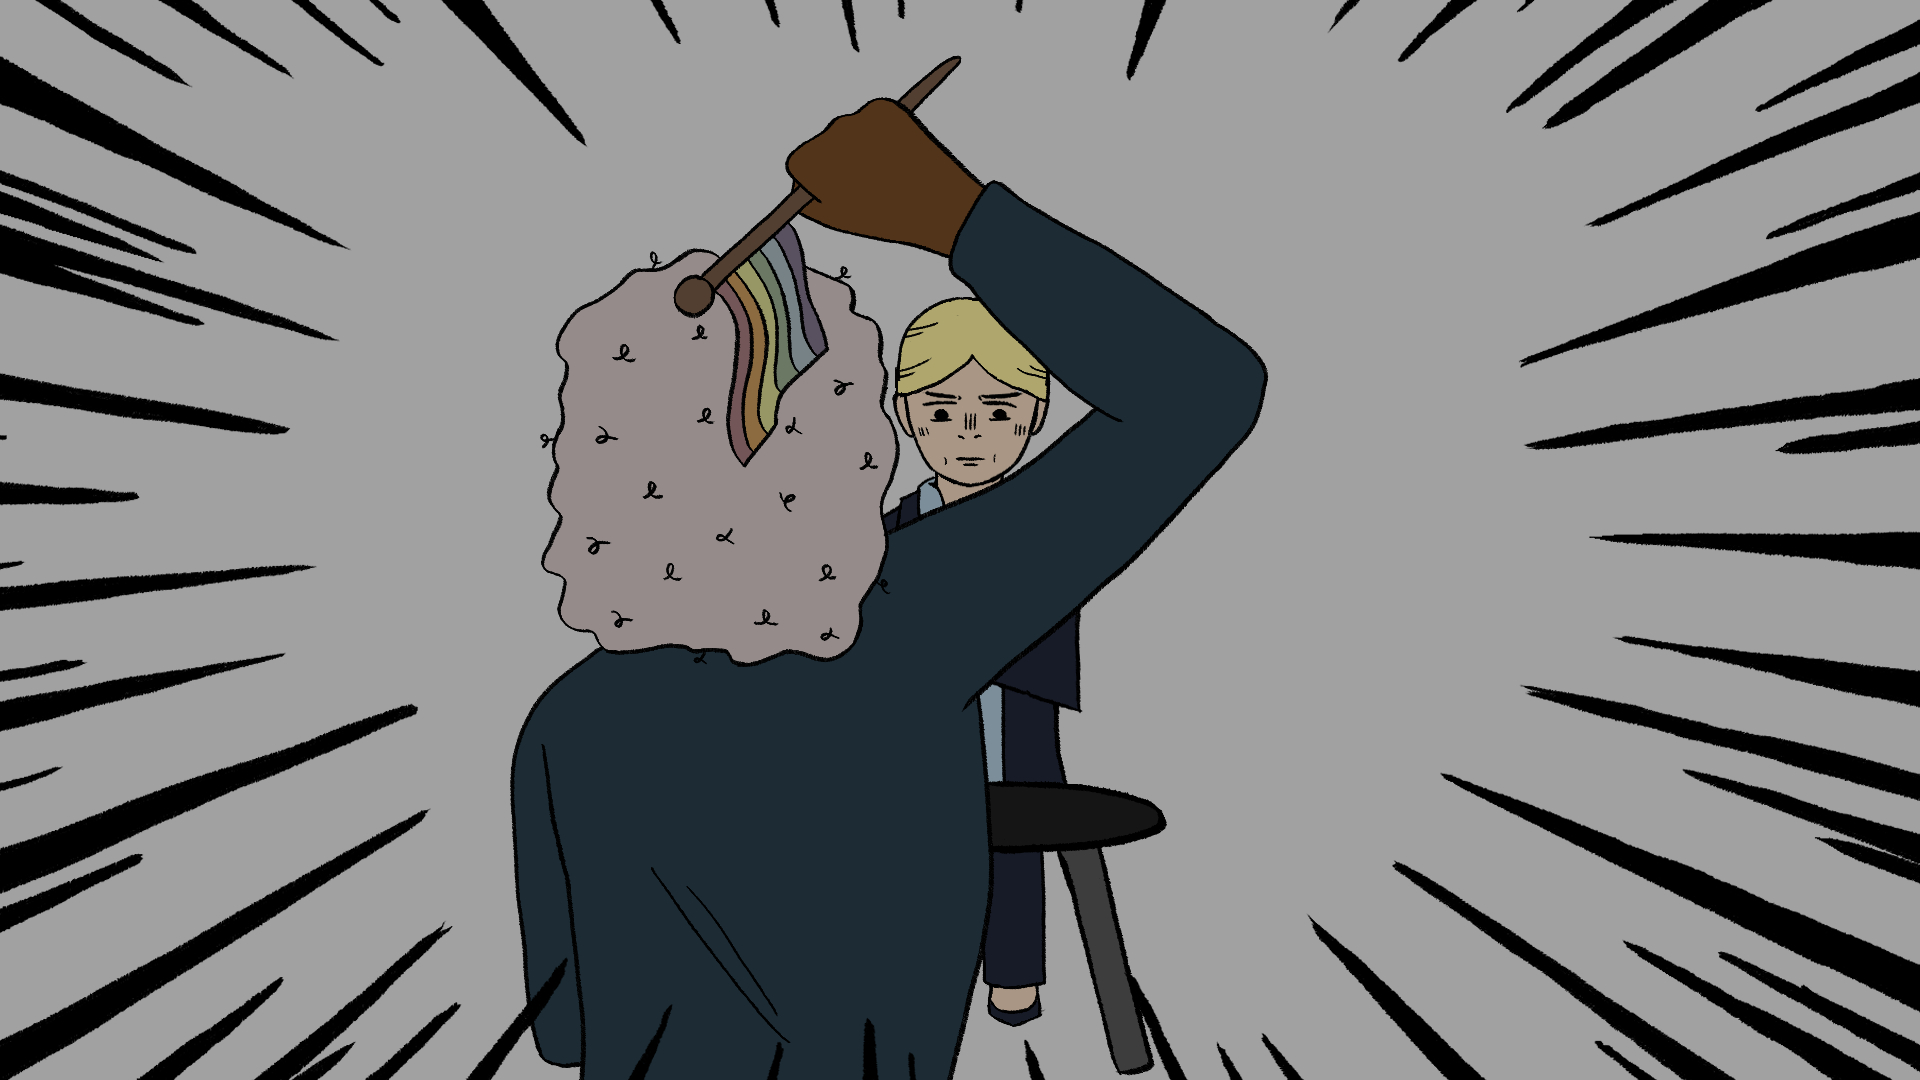 A still from an animated short film of the main character in the therapist's office holding the rainbow pride flag over their head by the small flagpole like a knife towards the therapist. The main character's back is towards us while the therapist is facing the camera. The main character is wearing a dark blue sweater. The therapist is a blonde middle-aged woman with her hair in a tight bun. She is wearing a dark blue business suit and a light blue dress shirt underneath. The grey three-legged table can be seen between the main character and the therapist. Various comic action lines can be seen around the edges of the still.